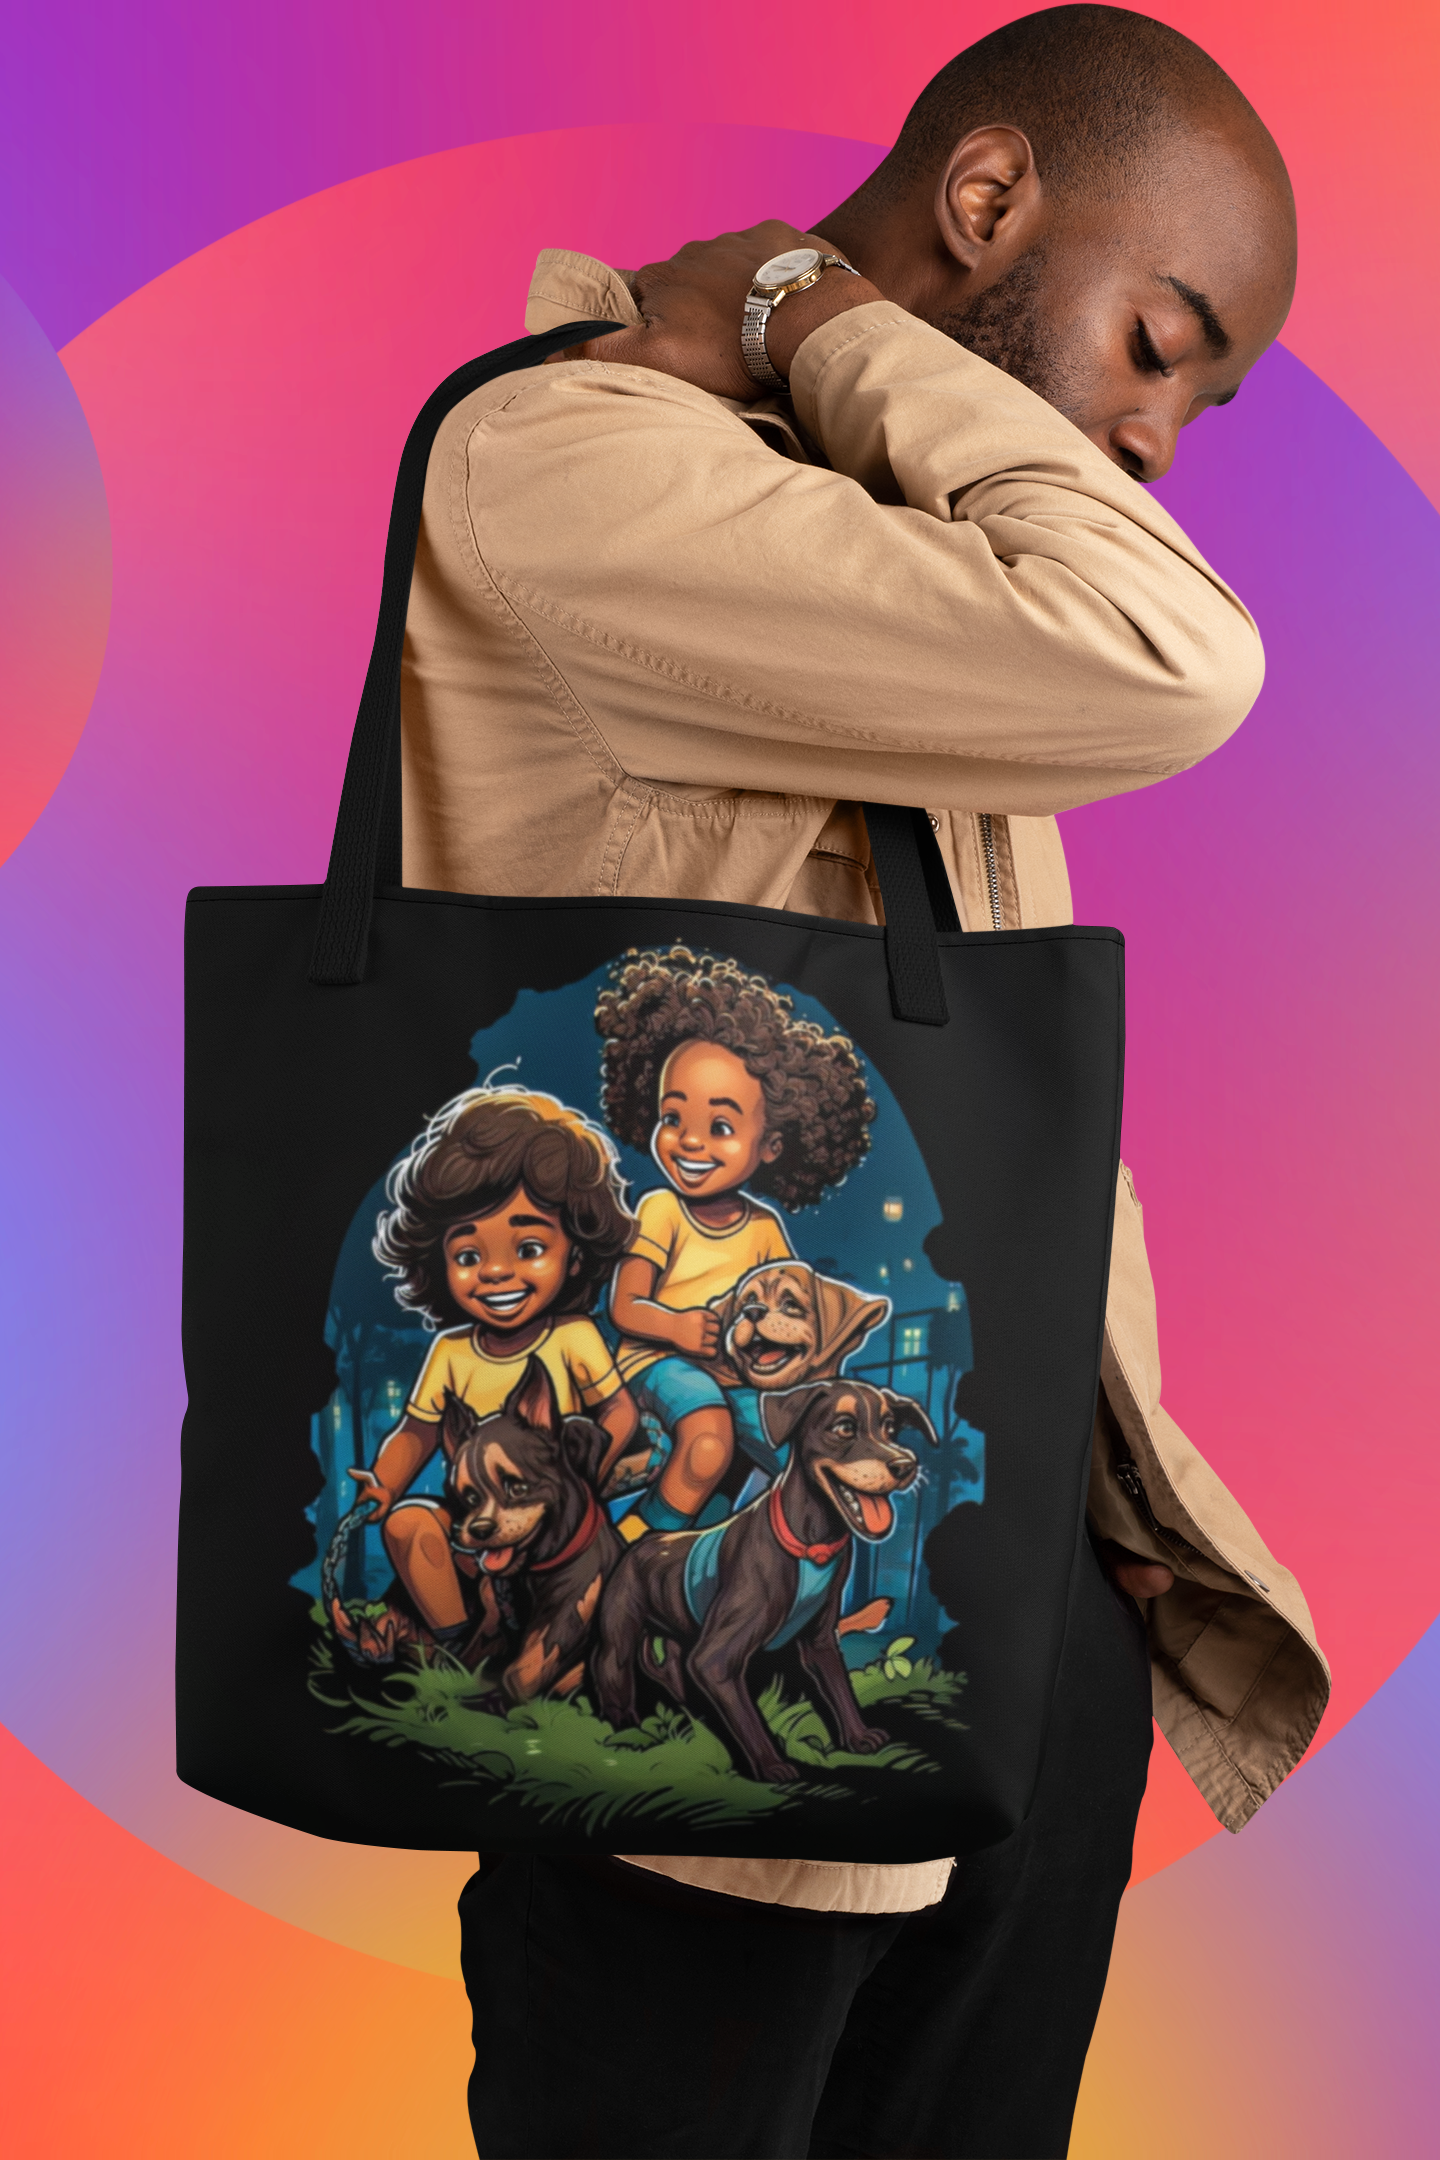 "KIDS AND PUPS" - AFRICAN AMERICAN THEMED Tote Bag